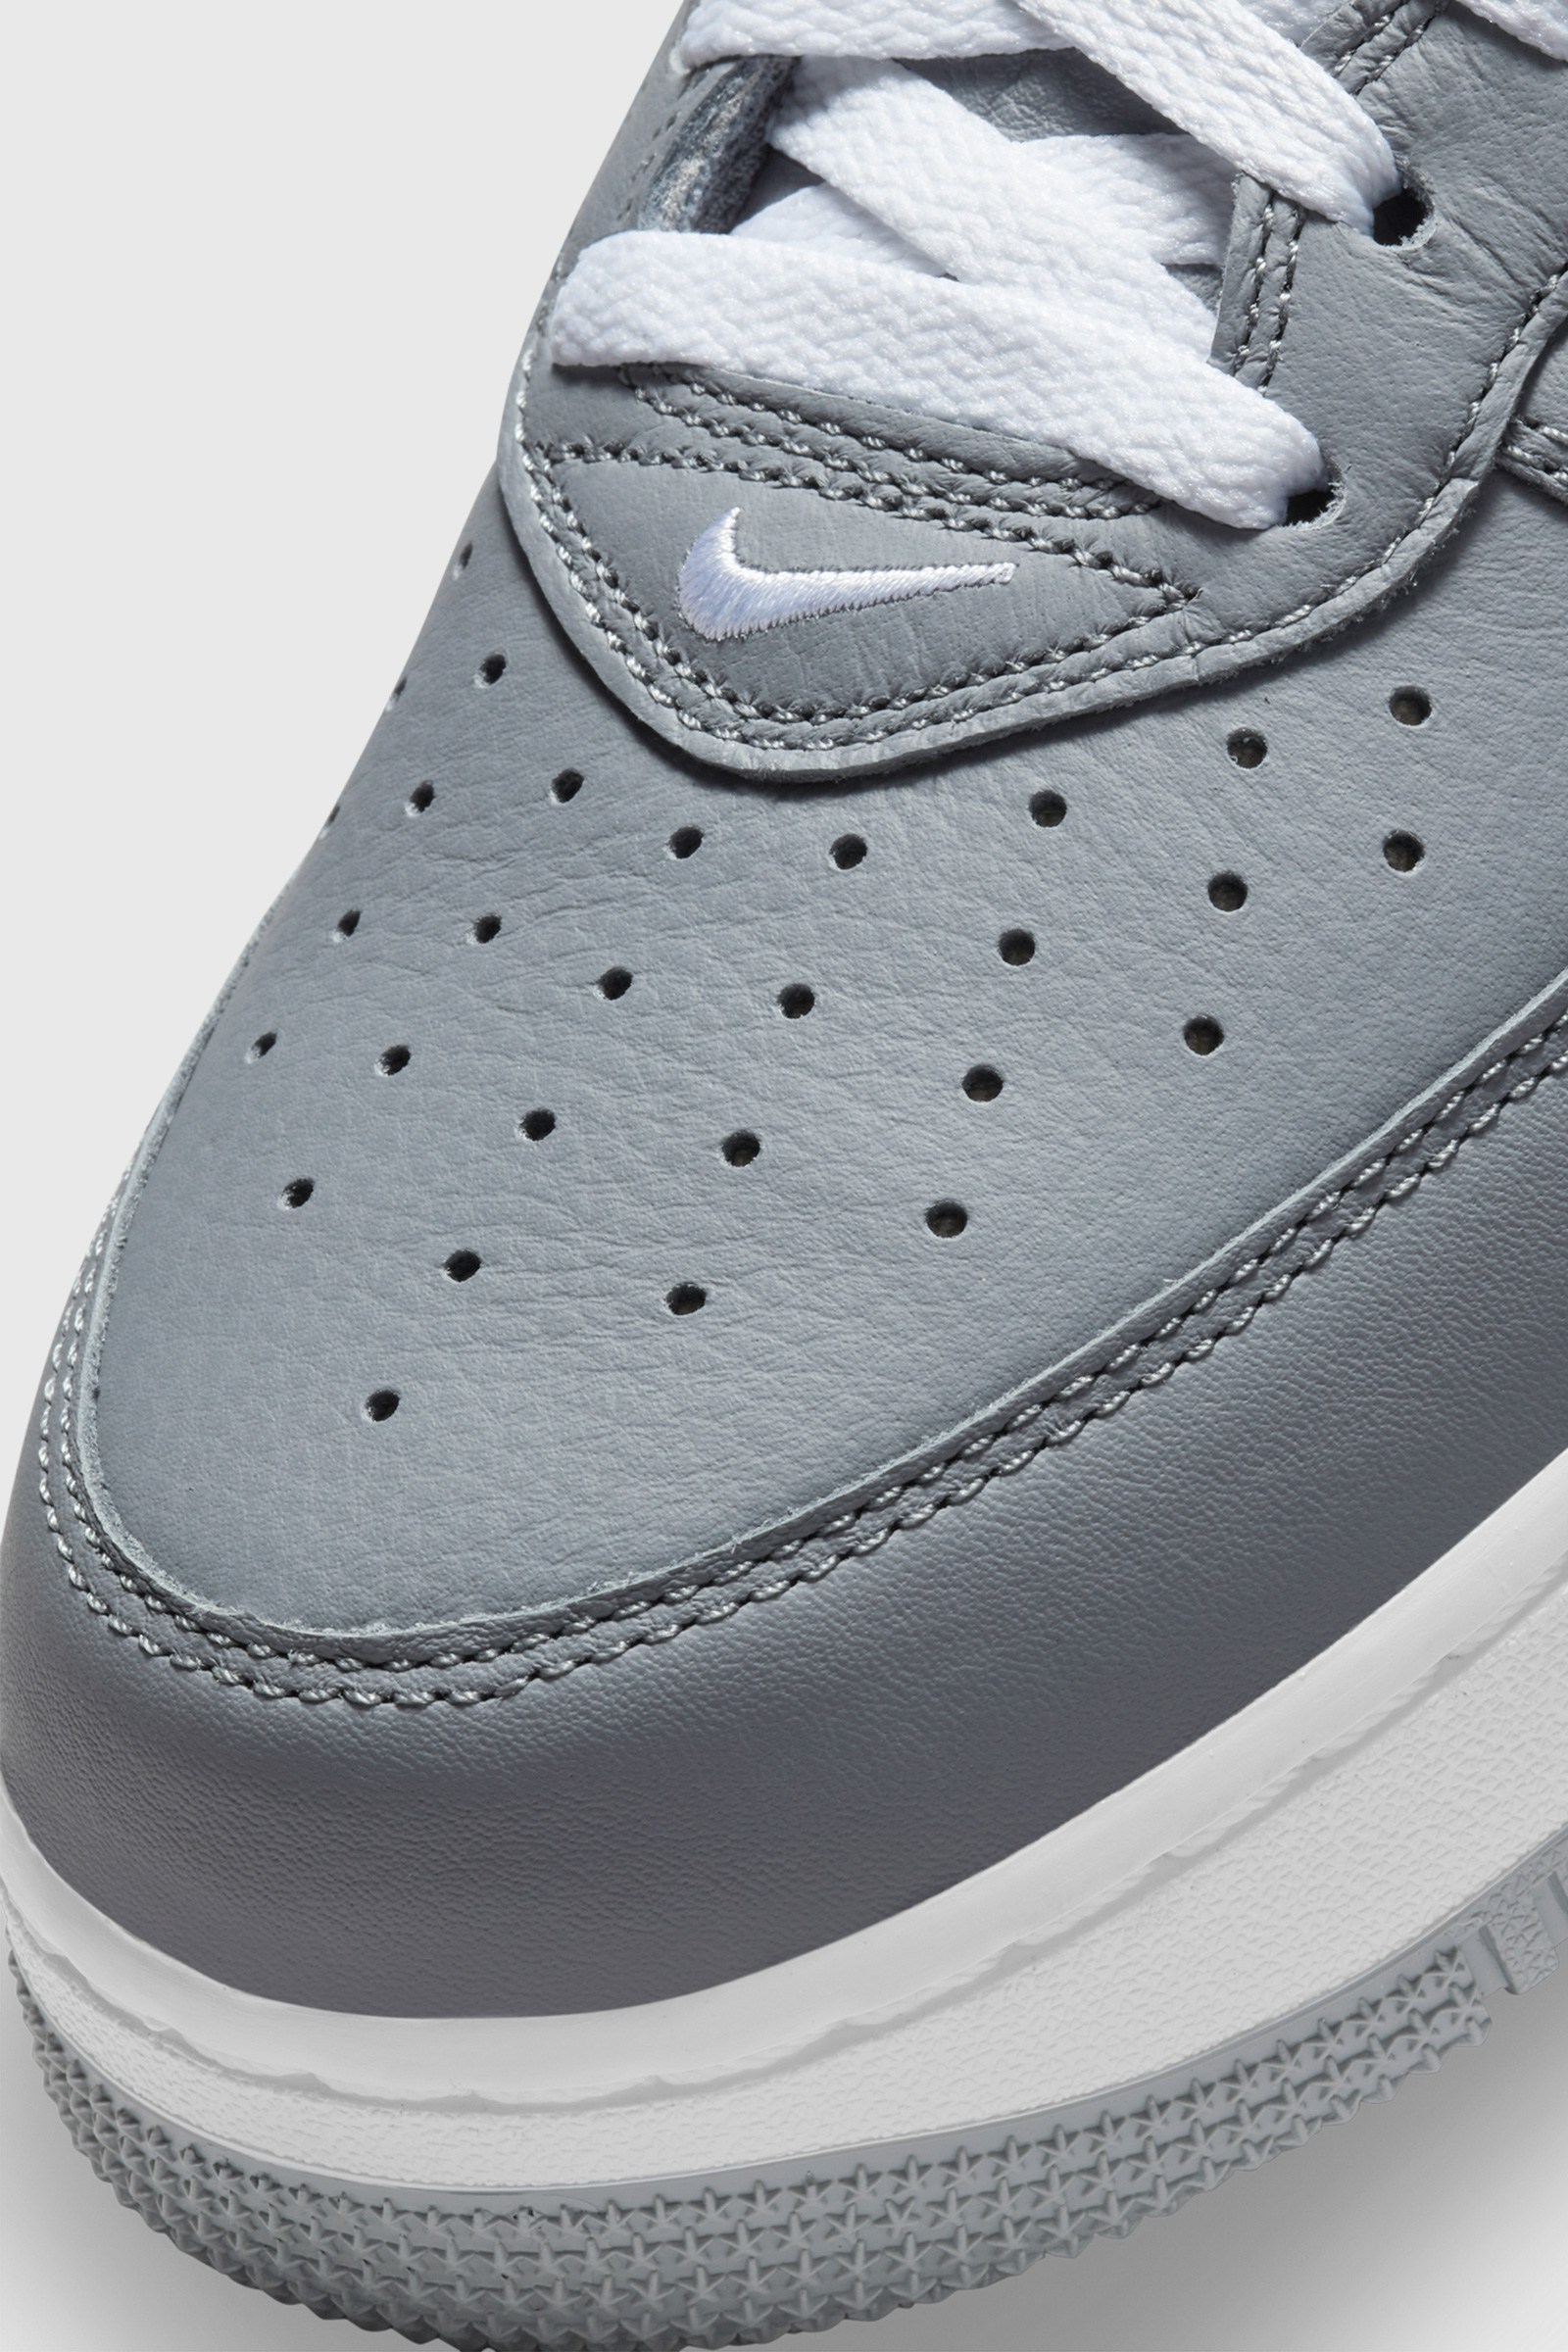 Nike Nike air Force 1 Mid '07 QS Cool grey/white-silver (001 ...